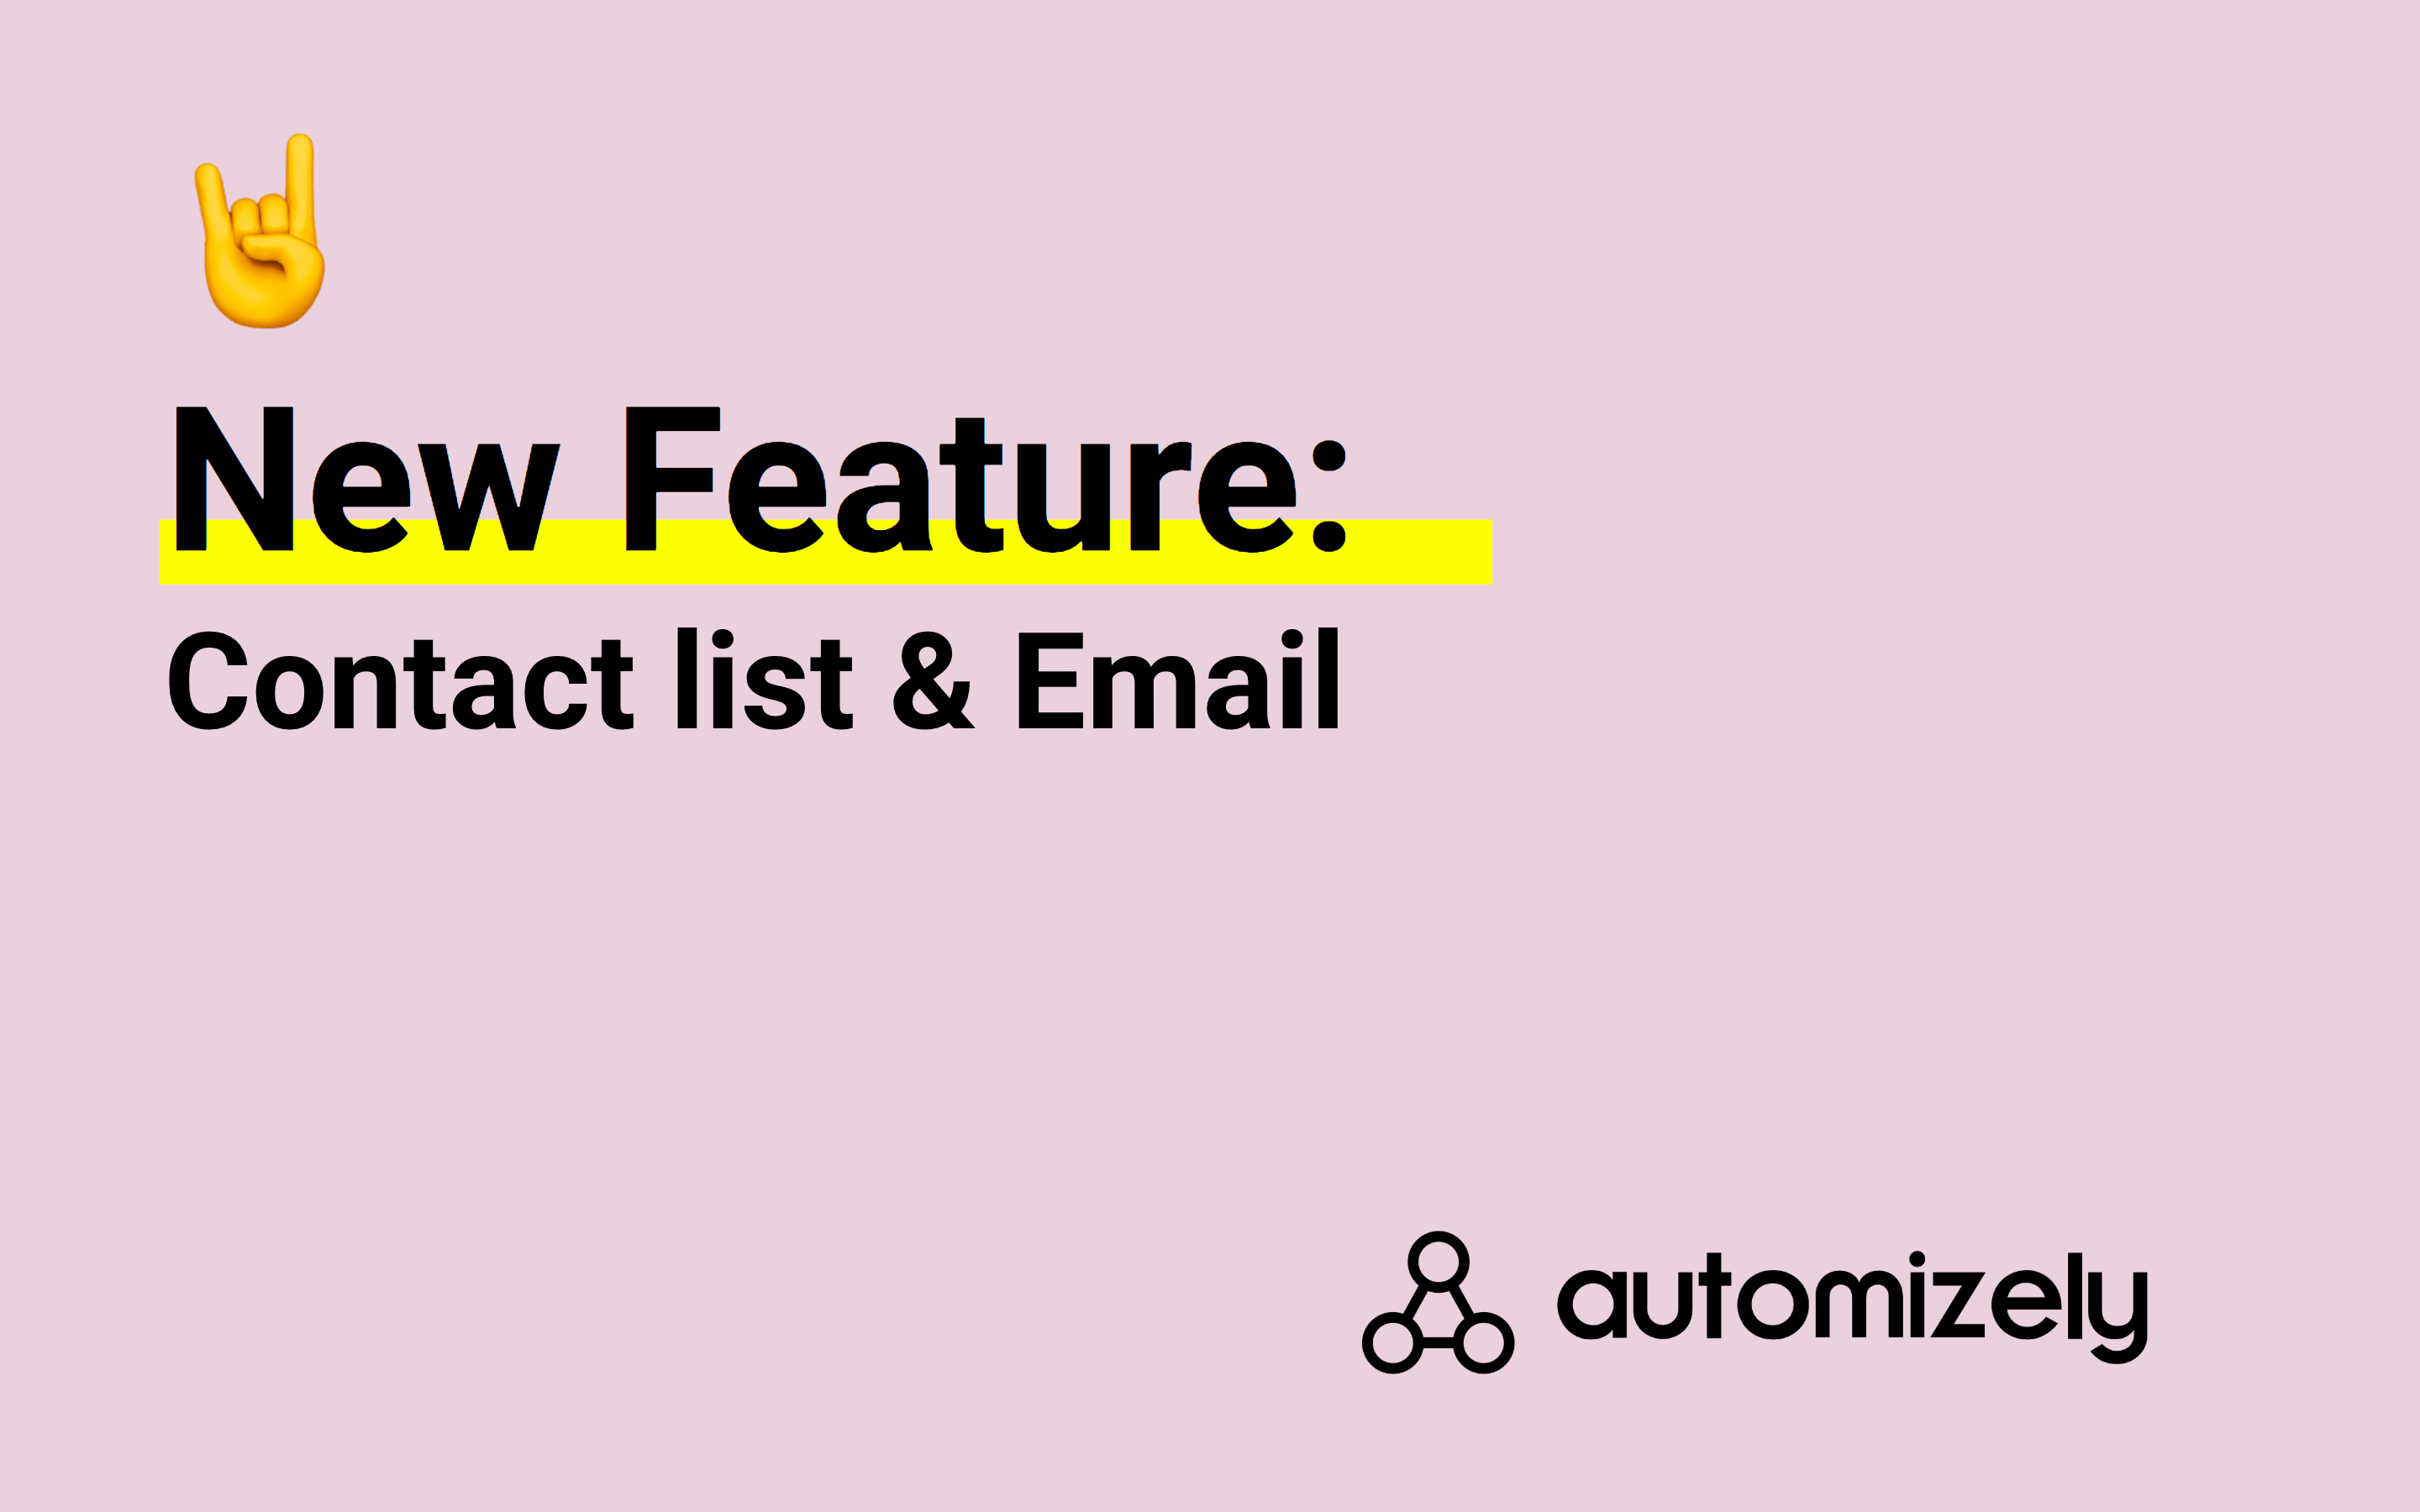 New features: Contact list & Email